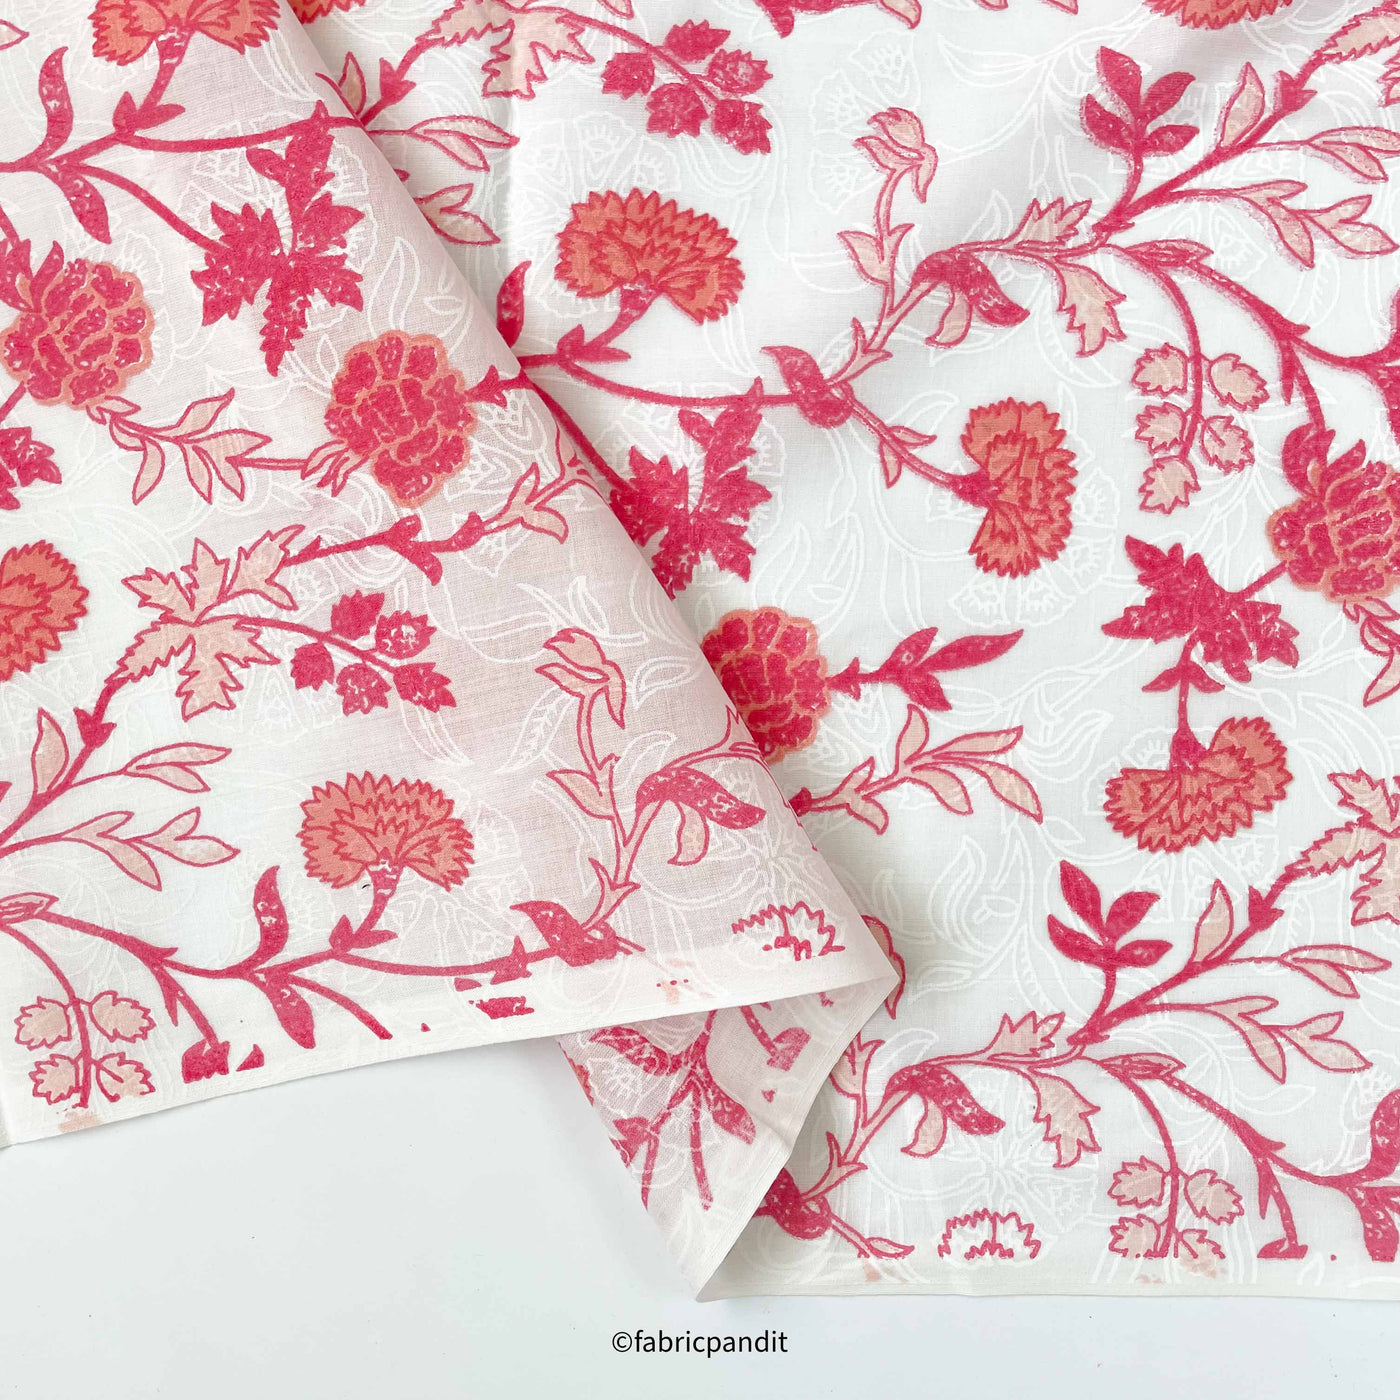 Hand Block Printed Cotton Fabric Cut Piece (CUT PIECE) Peach & White Orchids & Roses Hand Block Printed Pure Cotton Fabric (Width 42 inches)